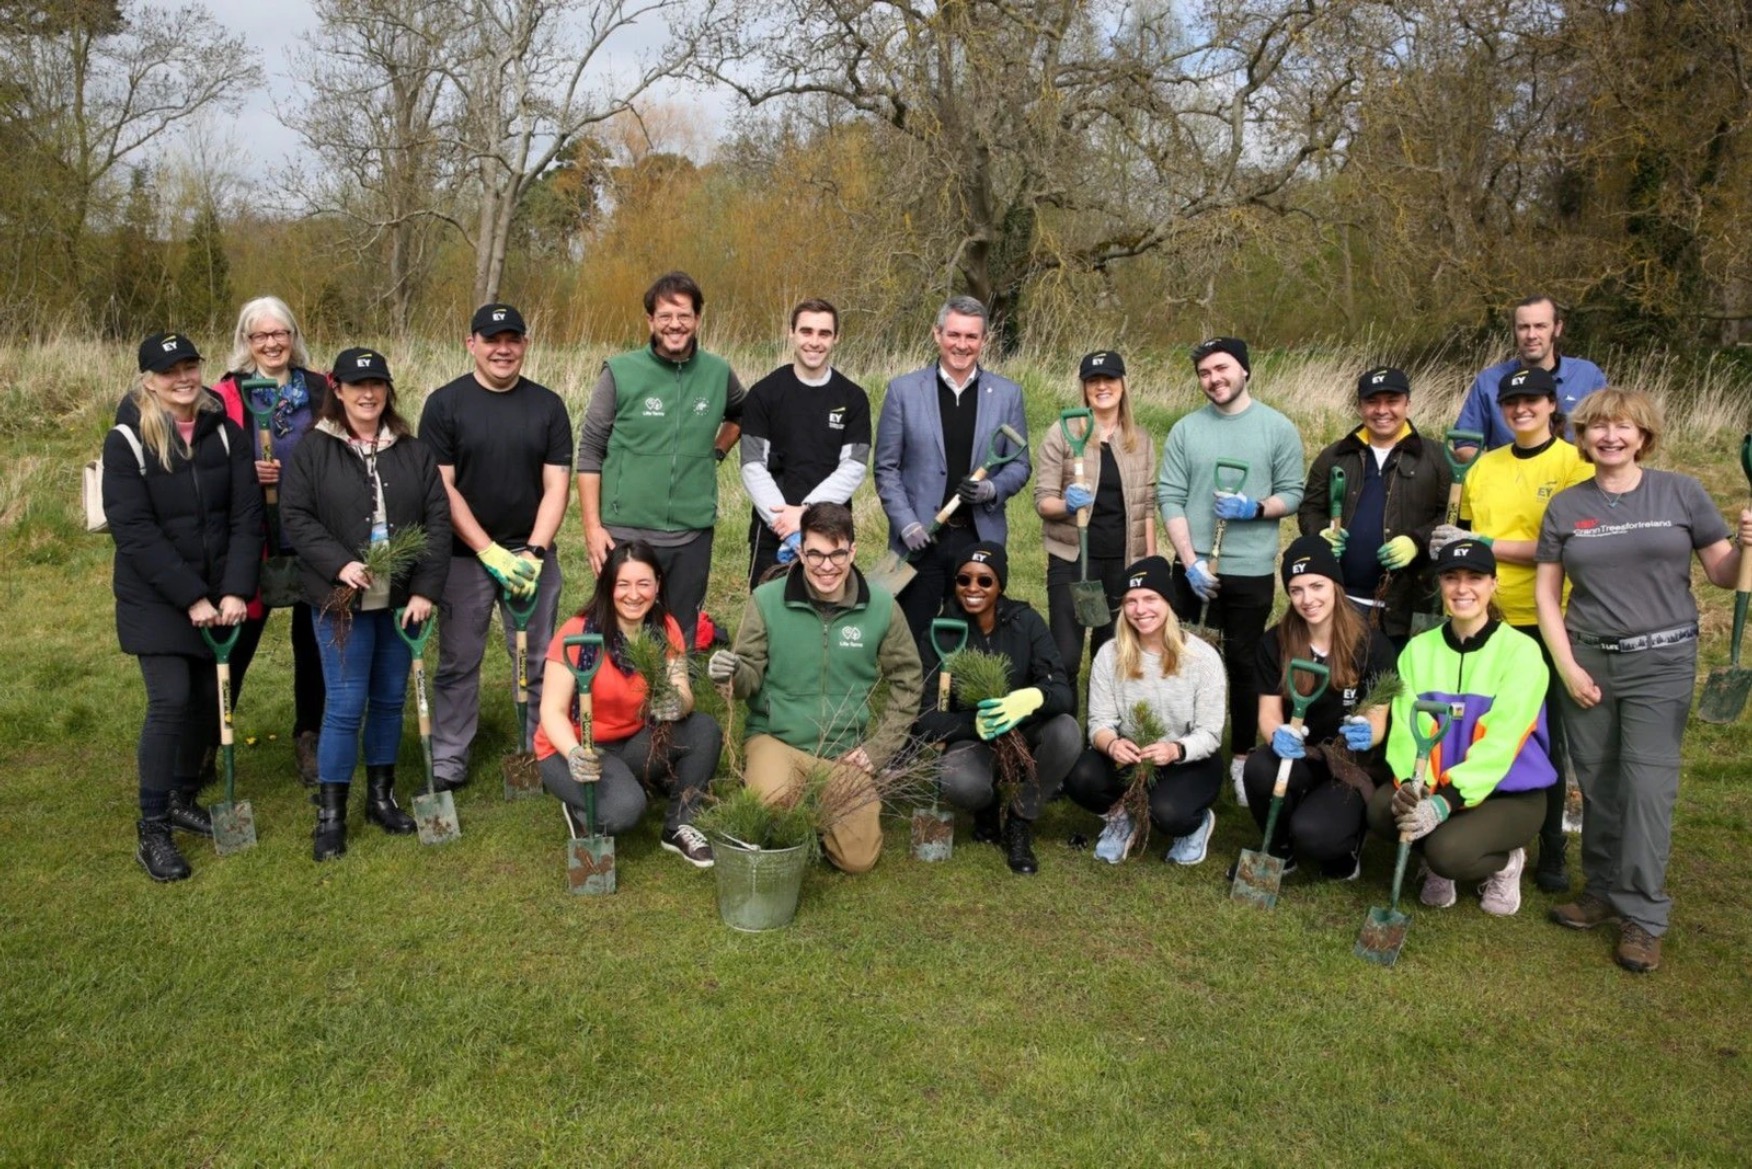 Life Terra are very happy to have been able to plant trees in Dublin in their first event in Ireland. About a hundred+ years ago only about 1% tree cover was left on this big island, now the country has about 11%. We aim to increase that percentage the coming years in collaboration with local partners. A big thanks to the EY Ireland team coming out to support this planting and partners One Tree Planted and Easy Treesie. More photos ?